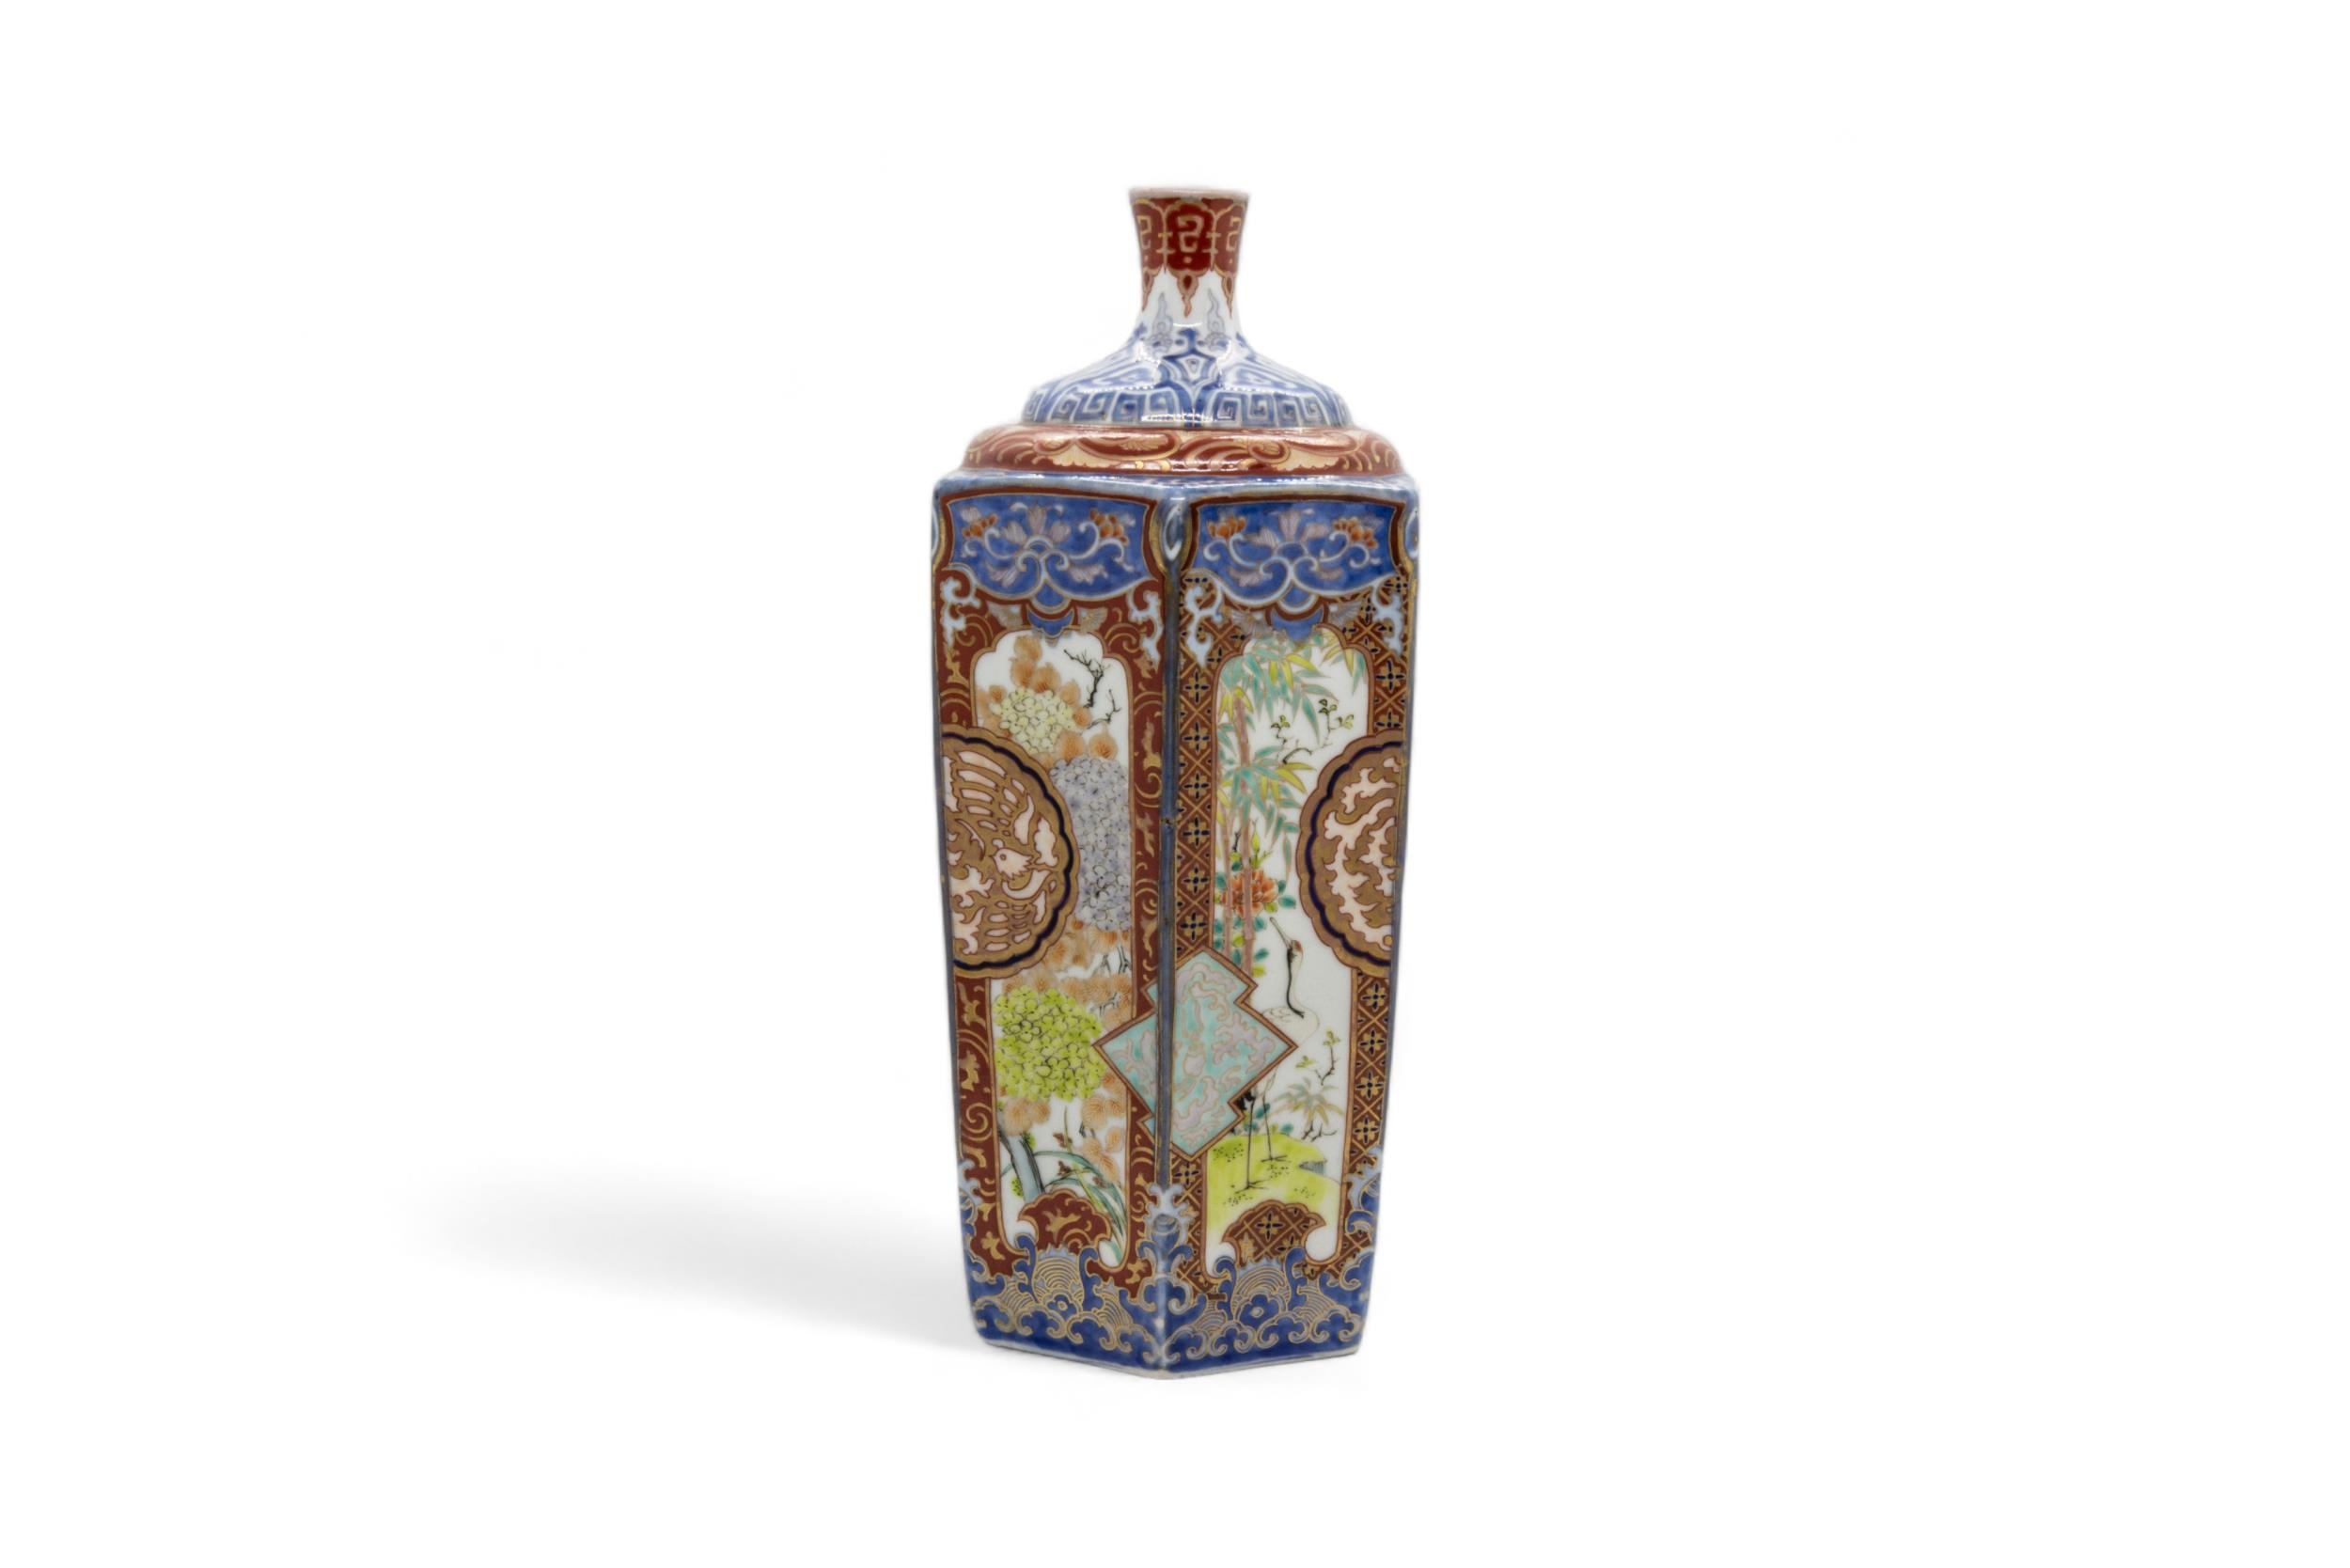 A GROUP OF FIVE JAPANESE PORCELAIN VASES 19TH / 20TH CENTURY largest, 46cm high, smallest, 24cm - Image 6 of 9